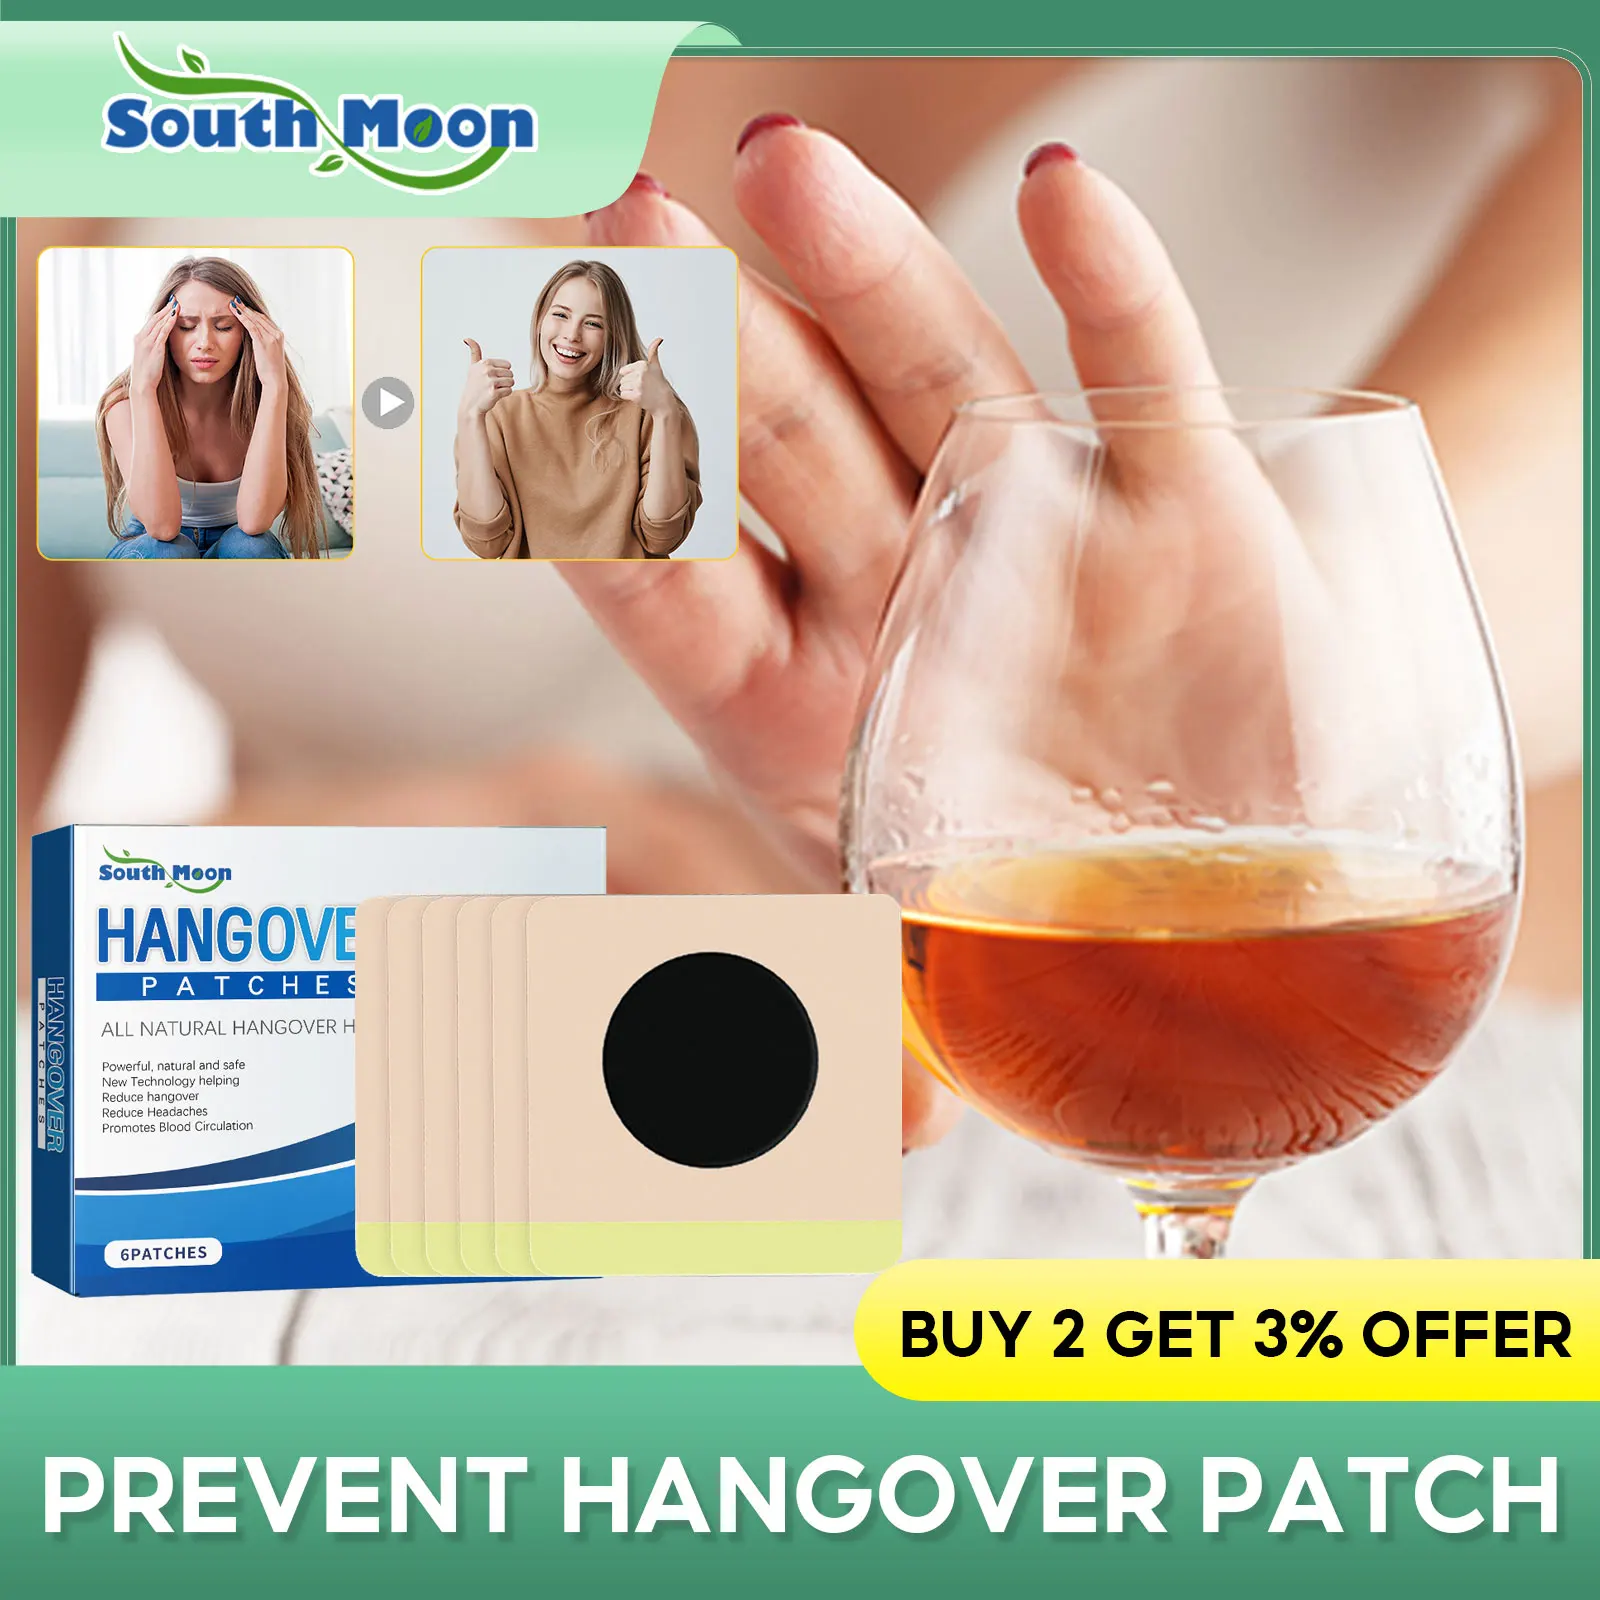 

Hangover Cures Patch Headache Vomiting Relief Alcohol Addiction Acupoint Massage Protect Liver Health Quit Drinking Plaster 6pcs